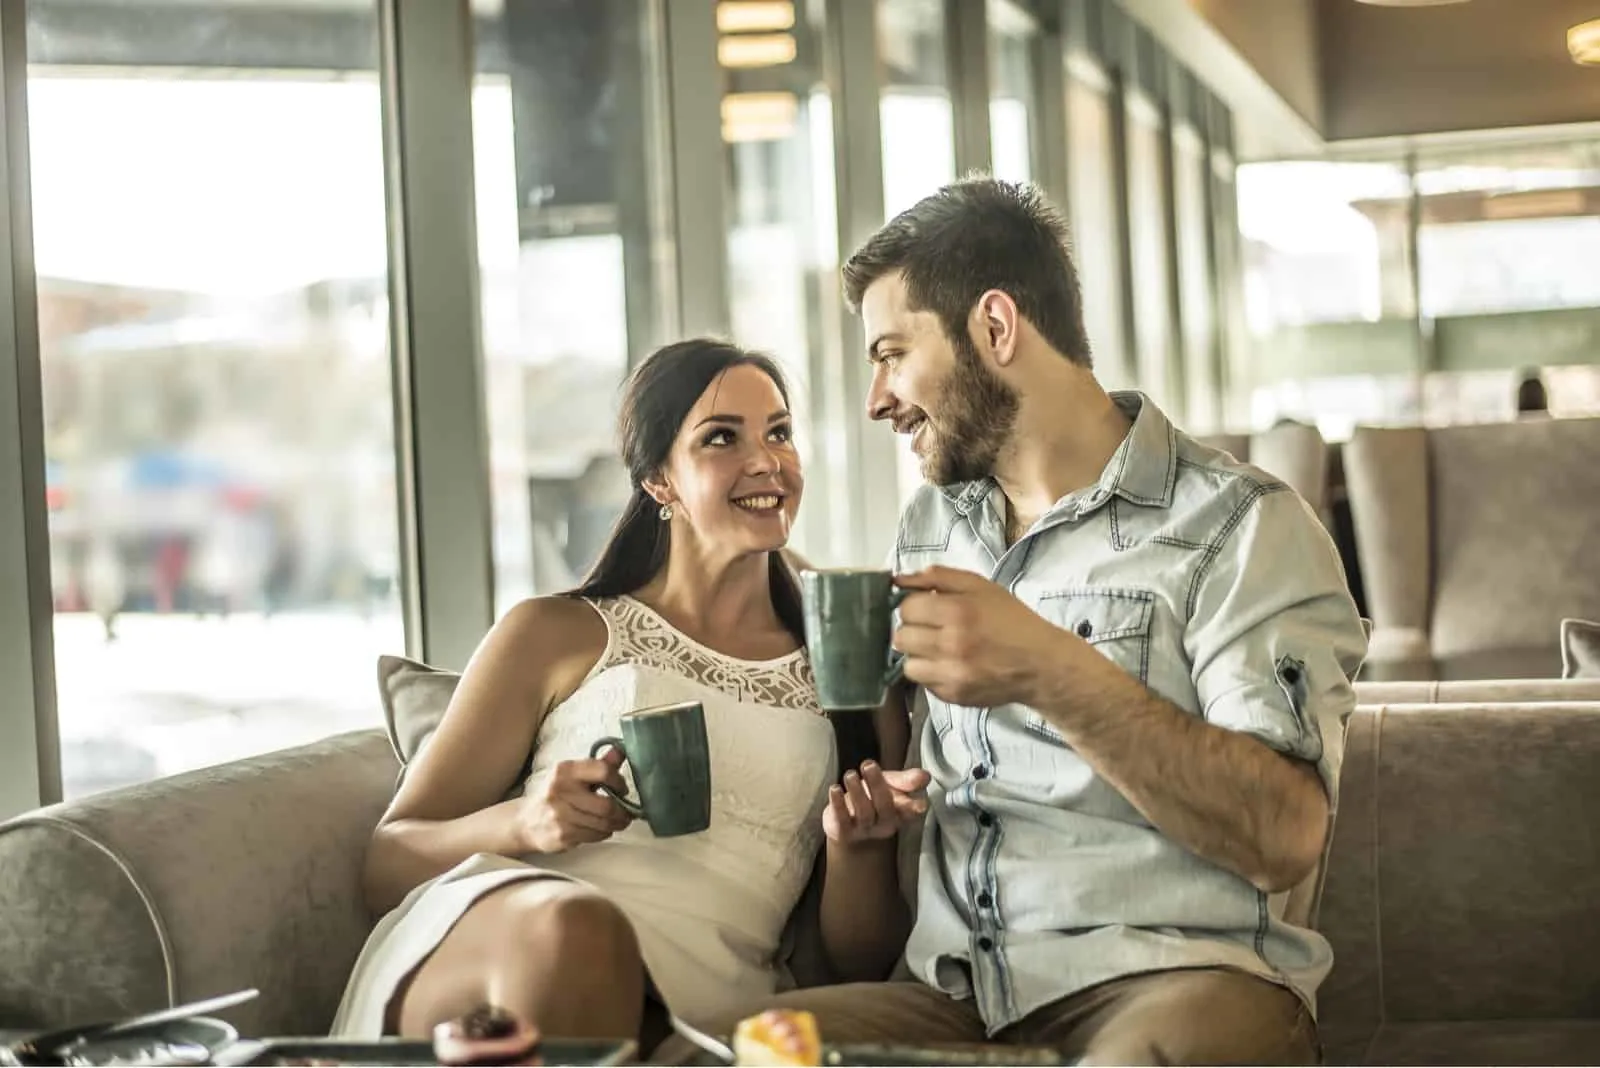 a smiling man and woman sit on the couch drinking coffee and talking